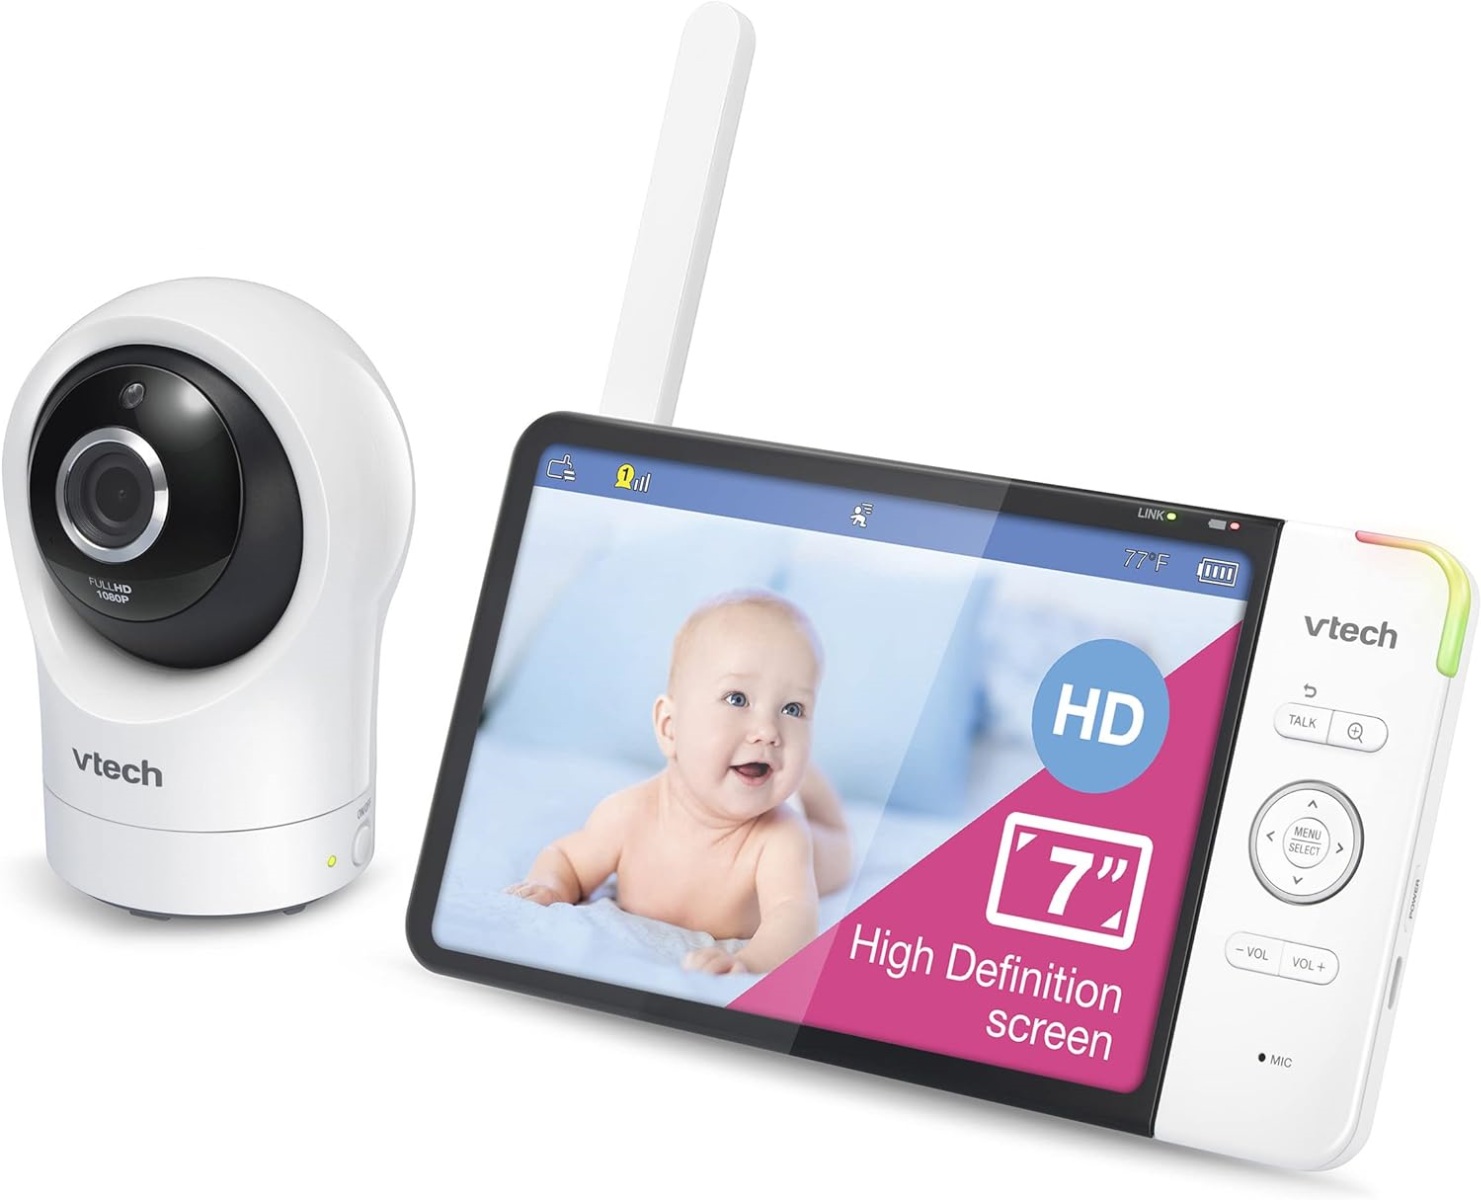 VTech VM351 5” Video Baby Monitor with Wide-Angle Lens and Optical Lens 